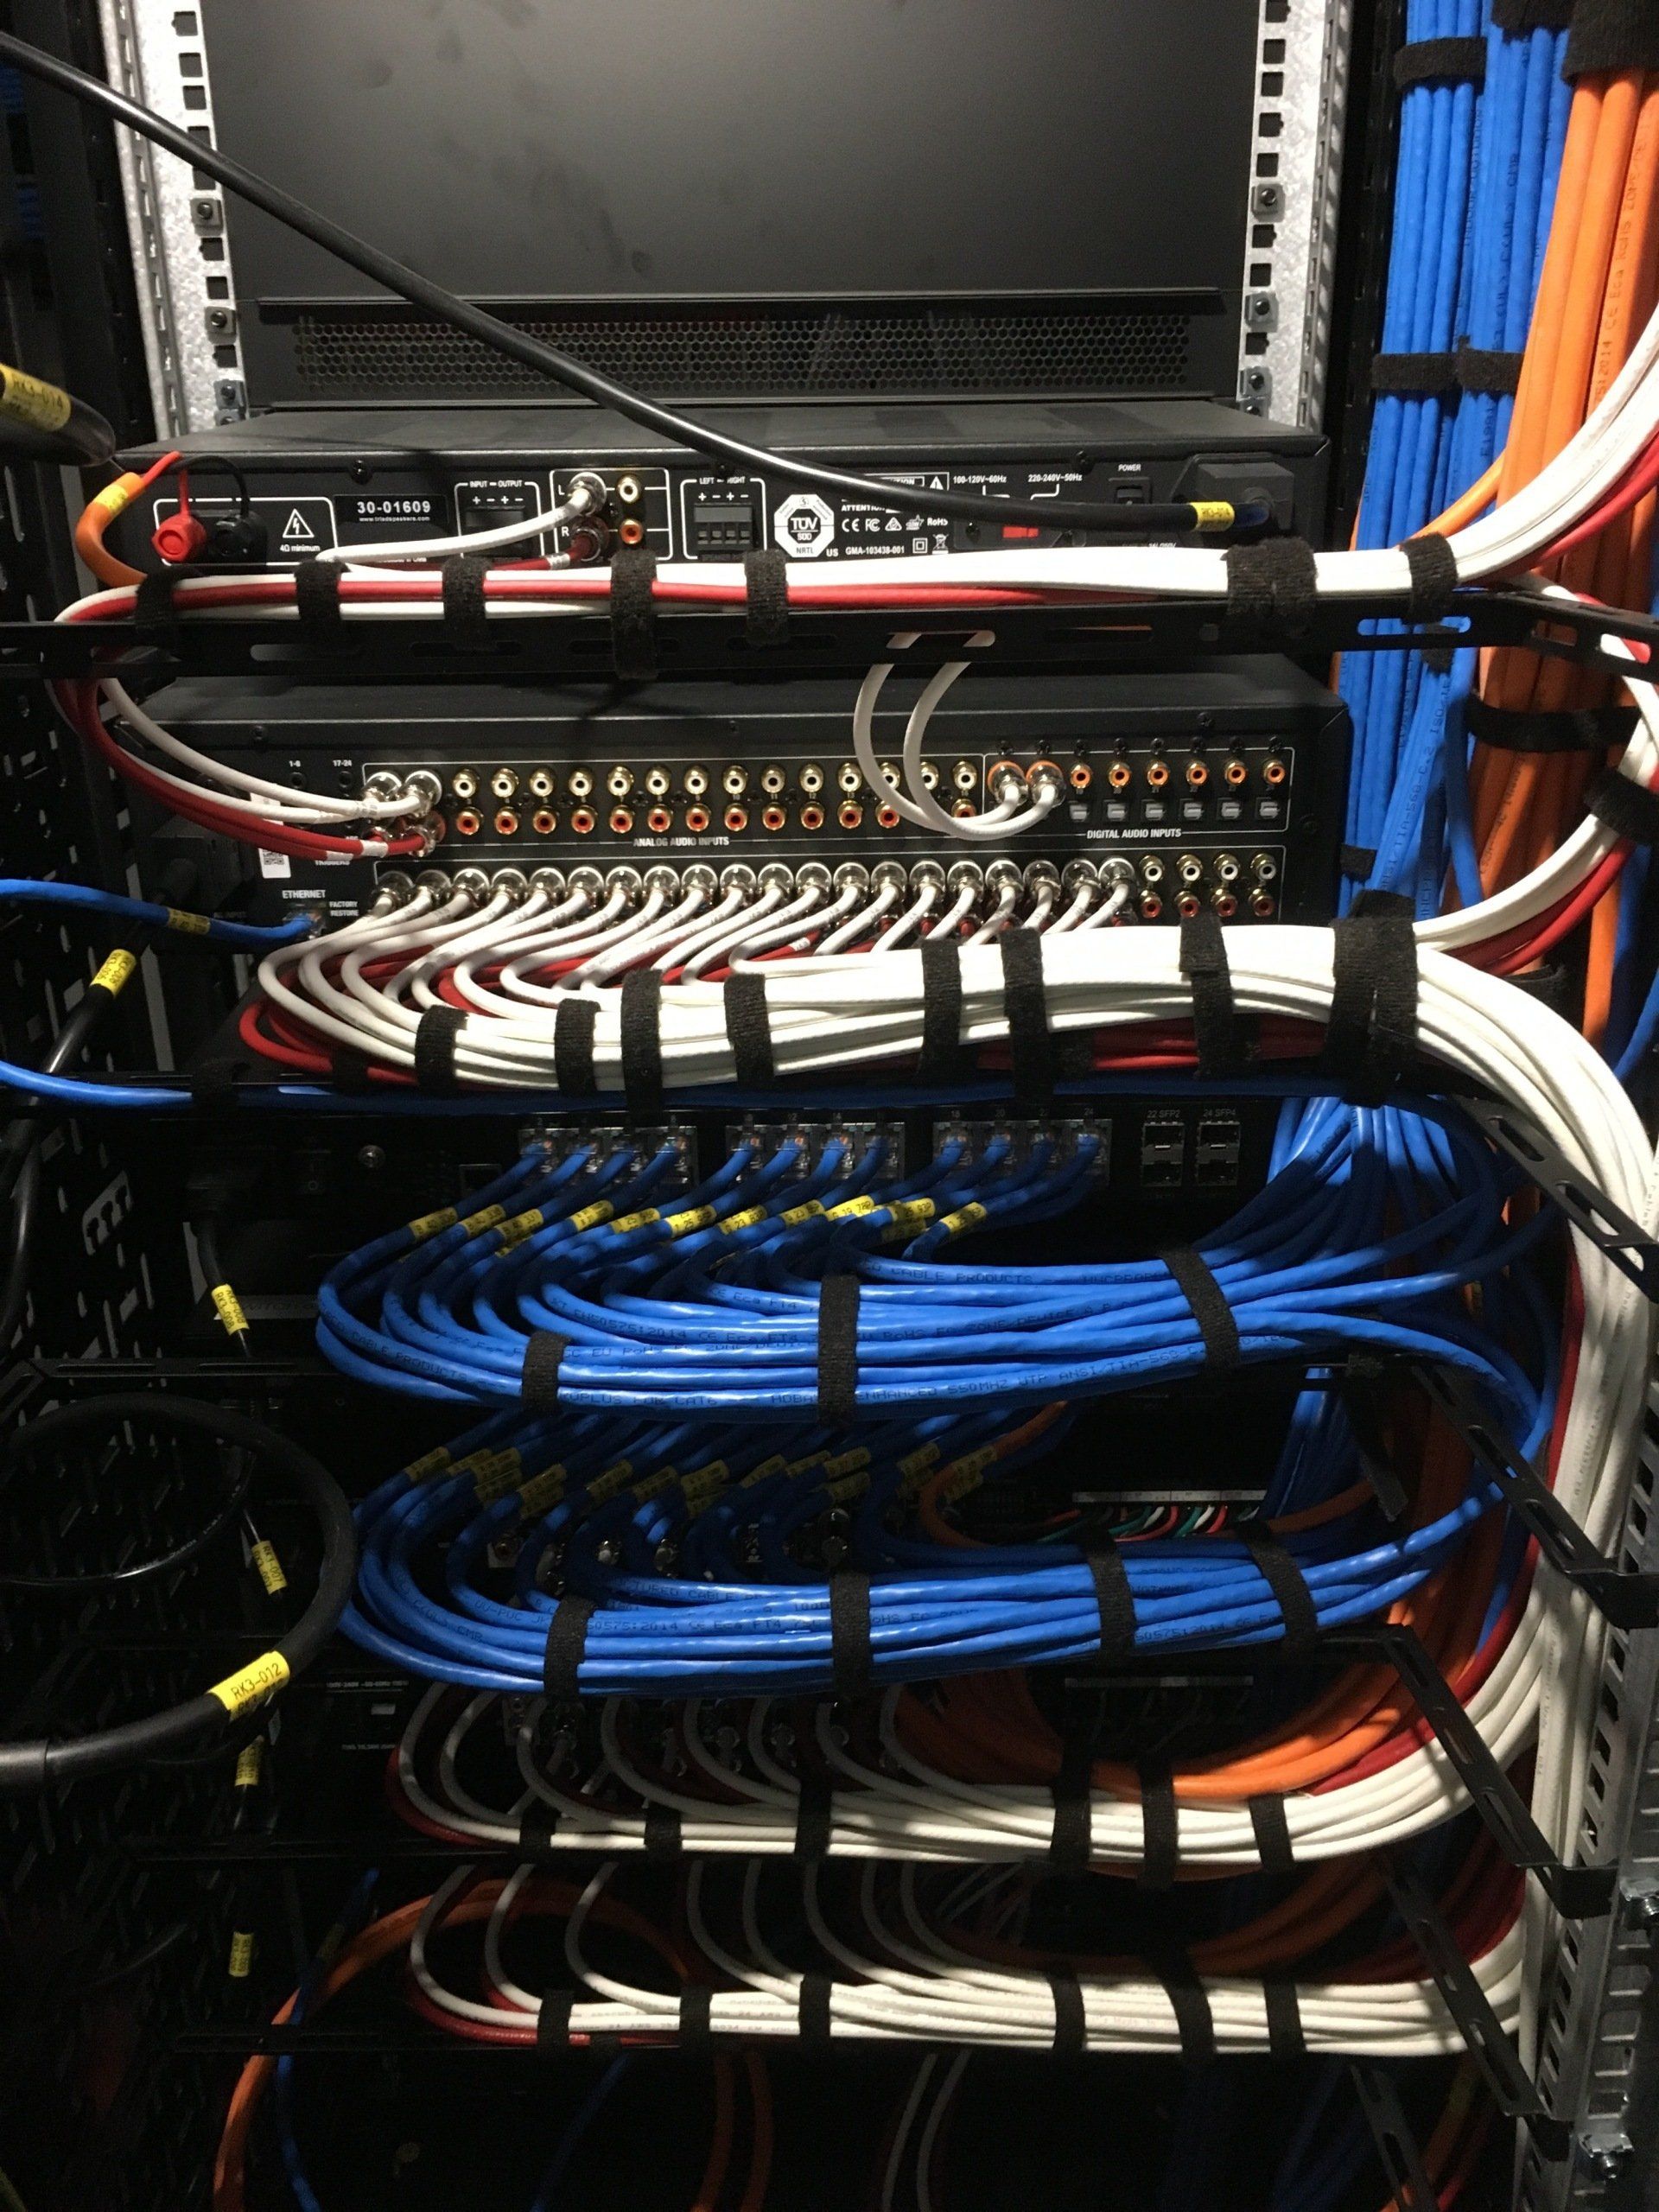 Photograph of lacing of category 6A cables in the audio rack